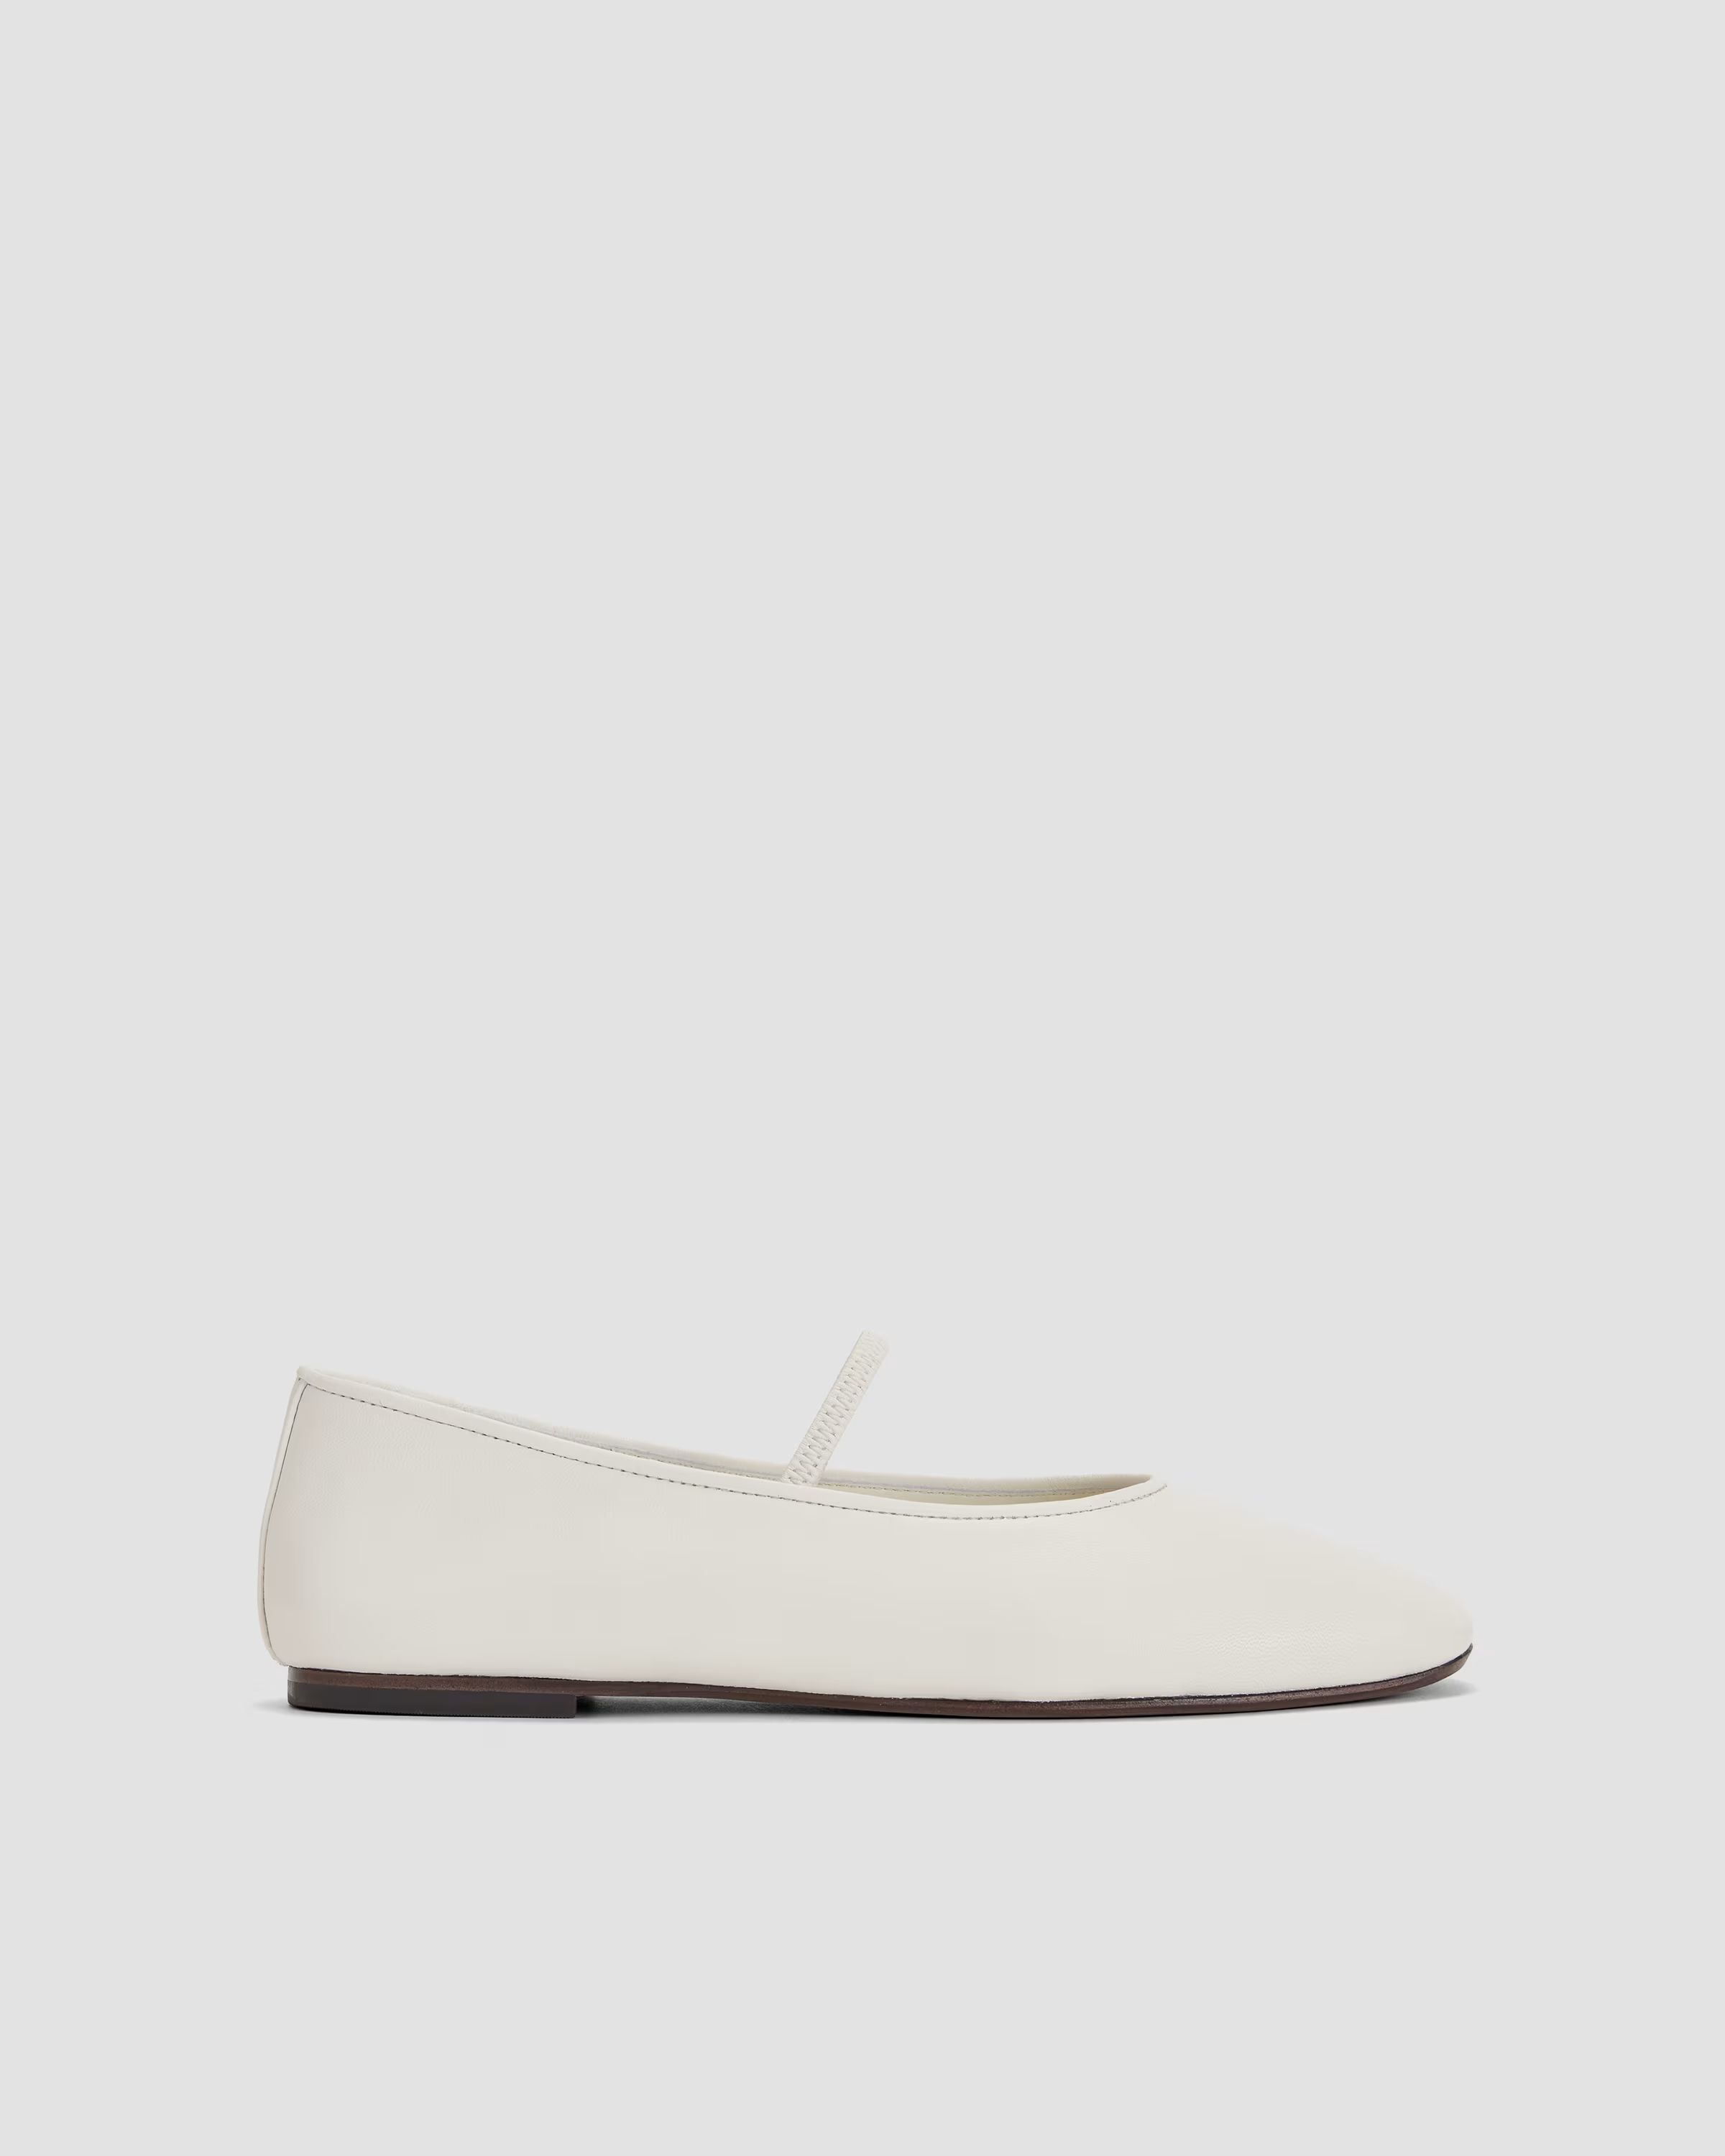 The Day Mary Jane | Everlane